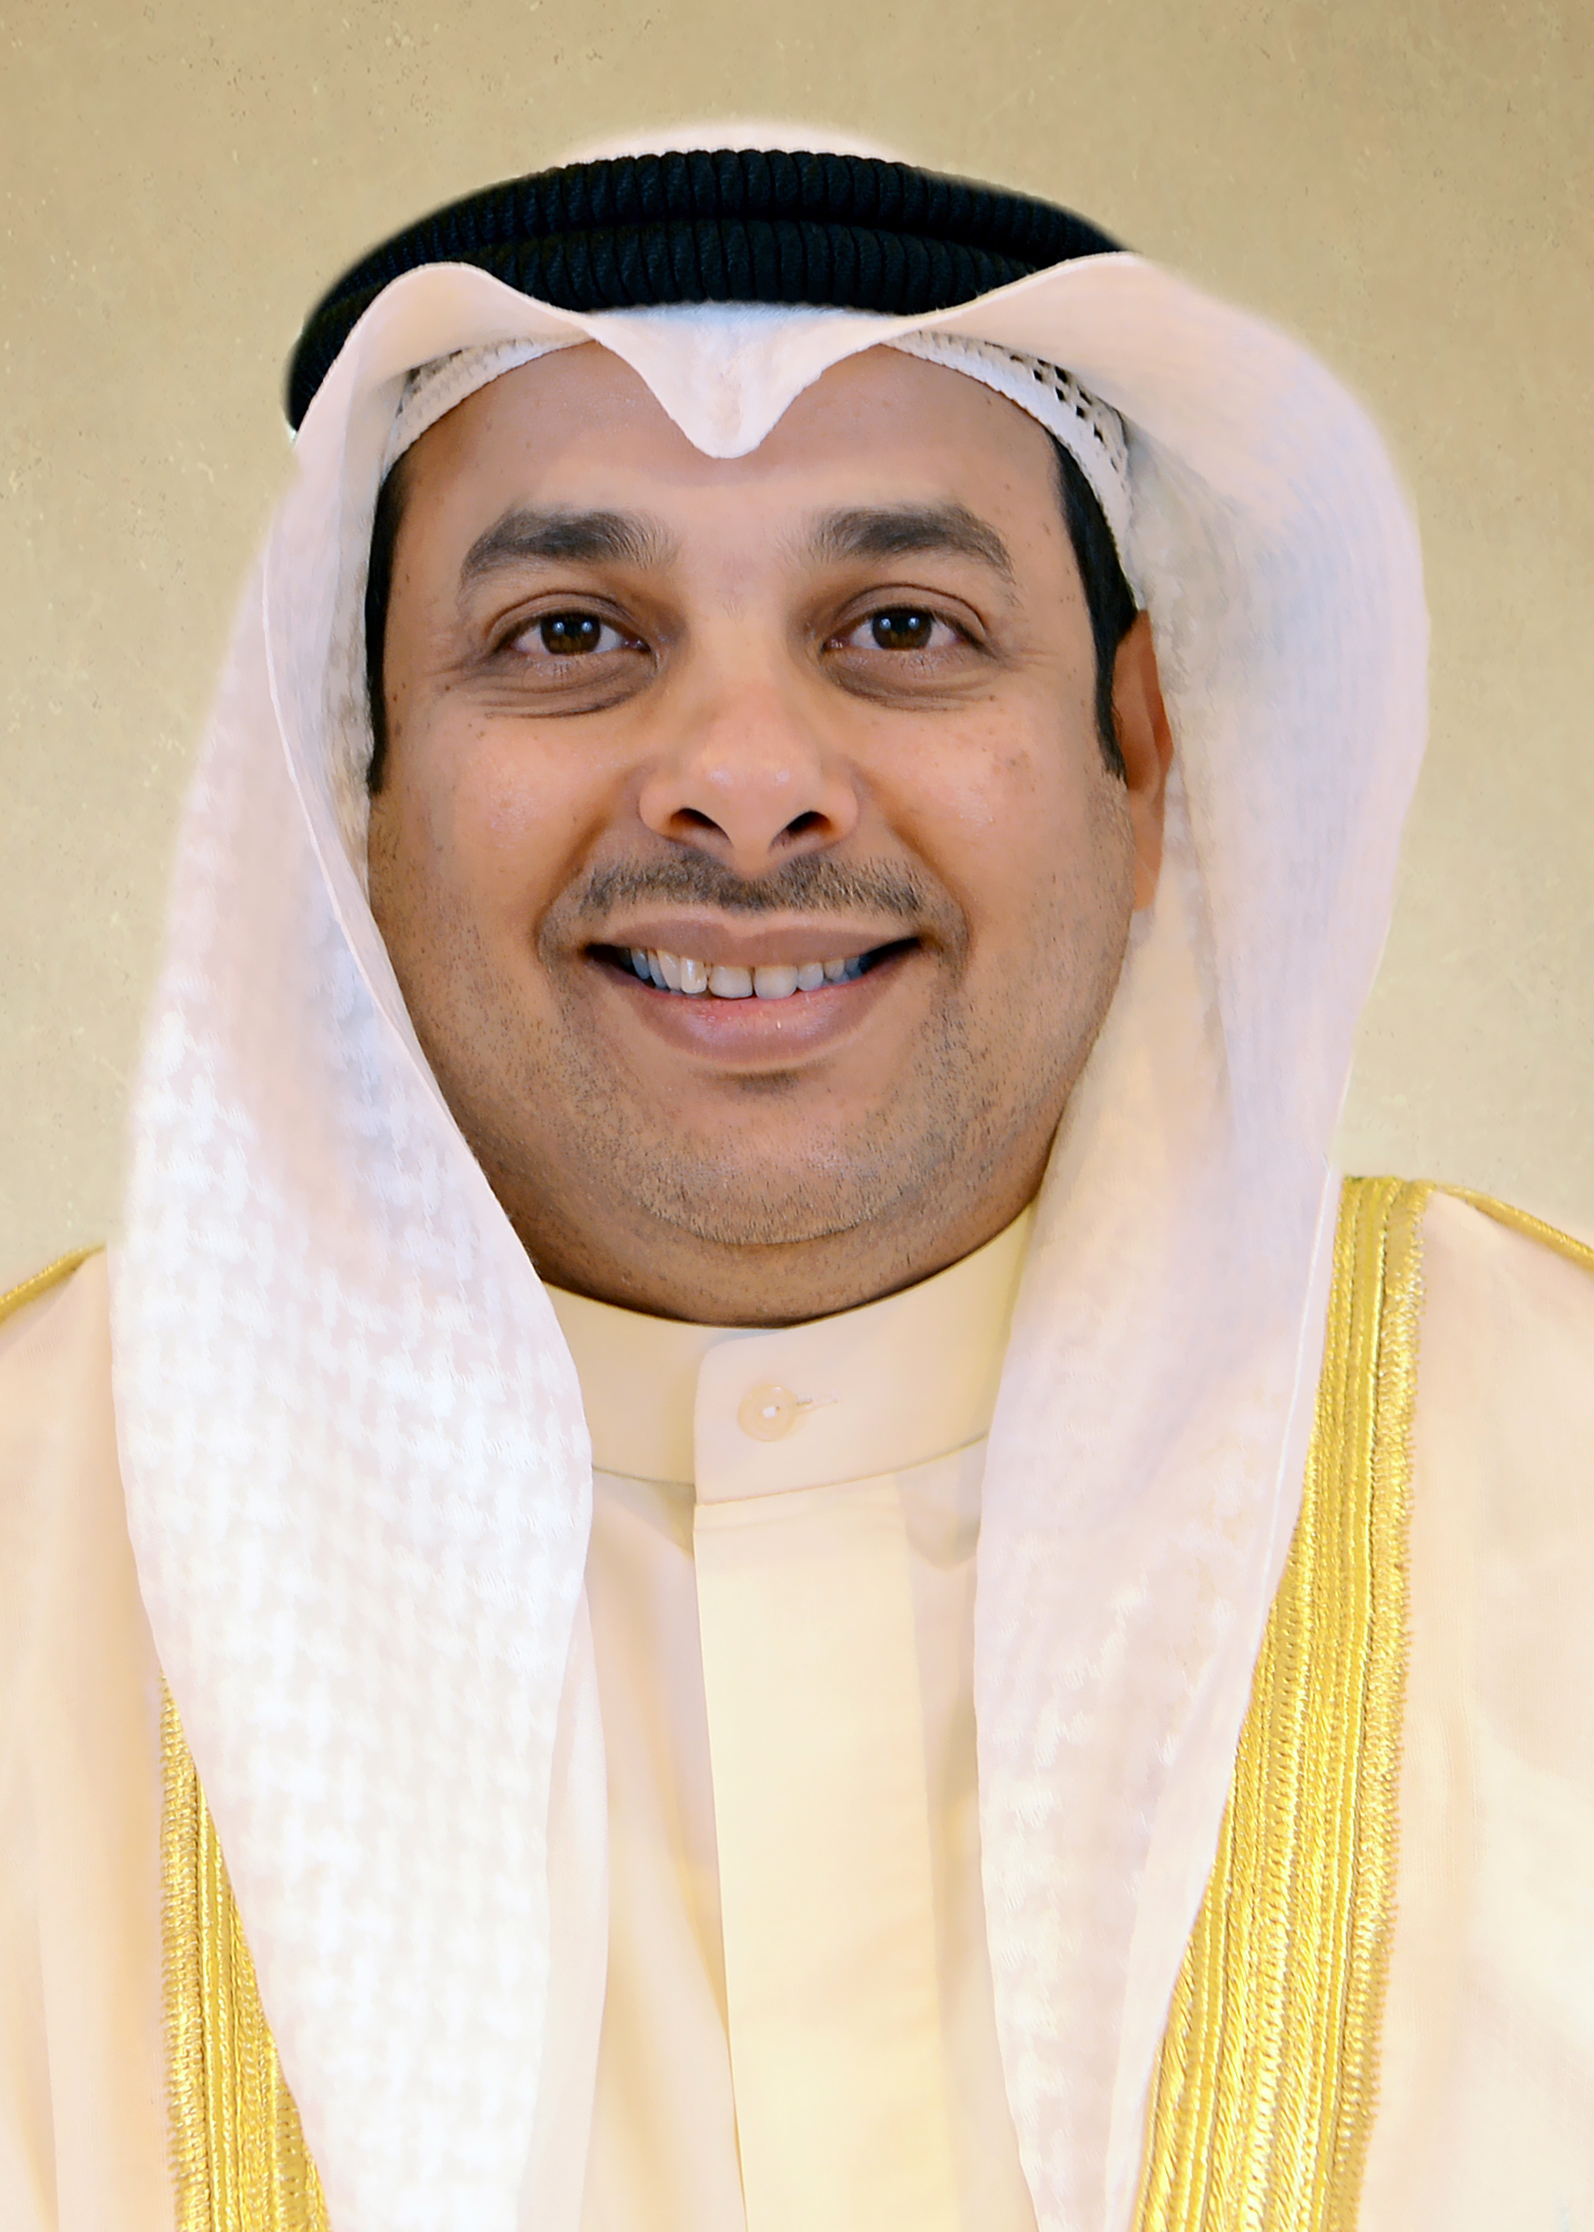 Minister of Justice and Minister of Awqaf and Islamic Affairs Yaqoub Al-Sanea